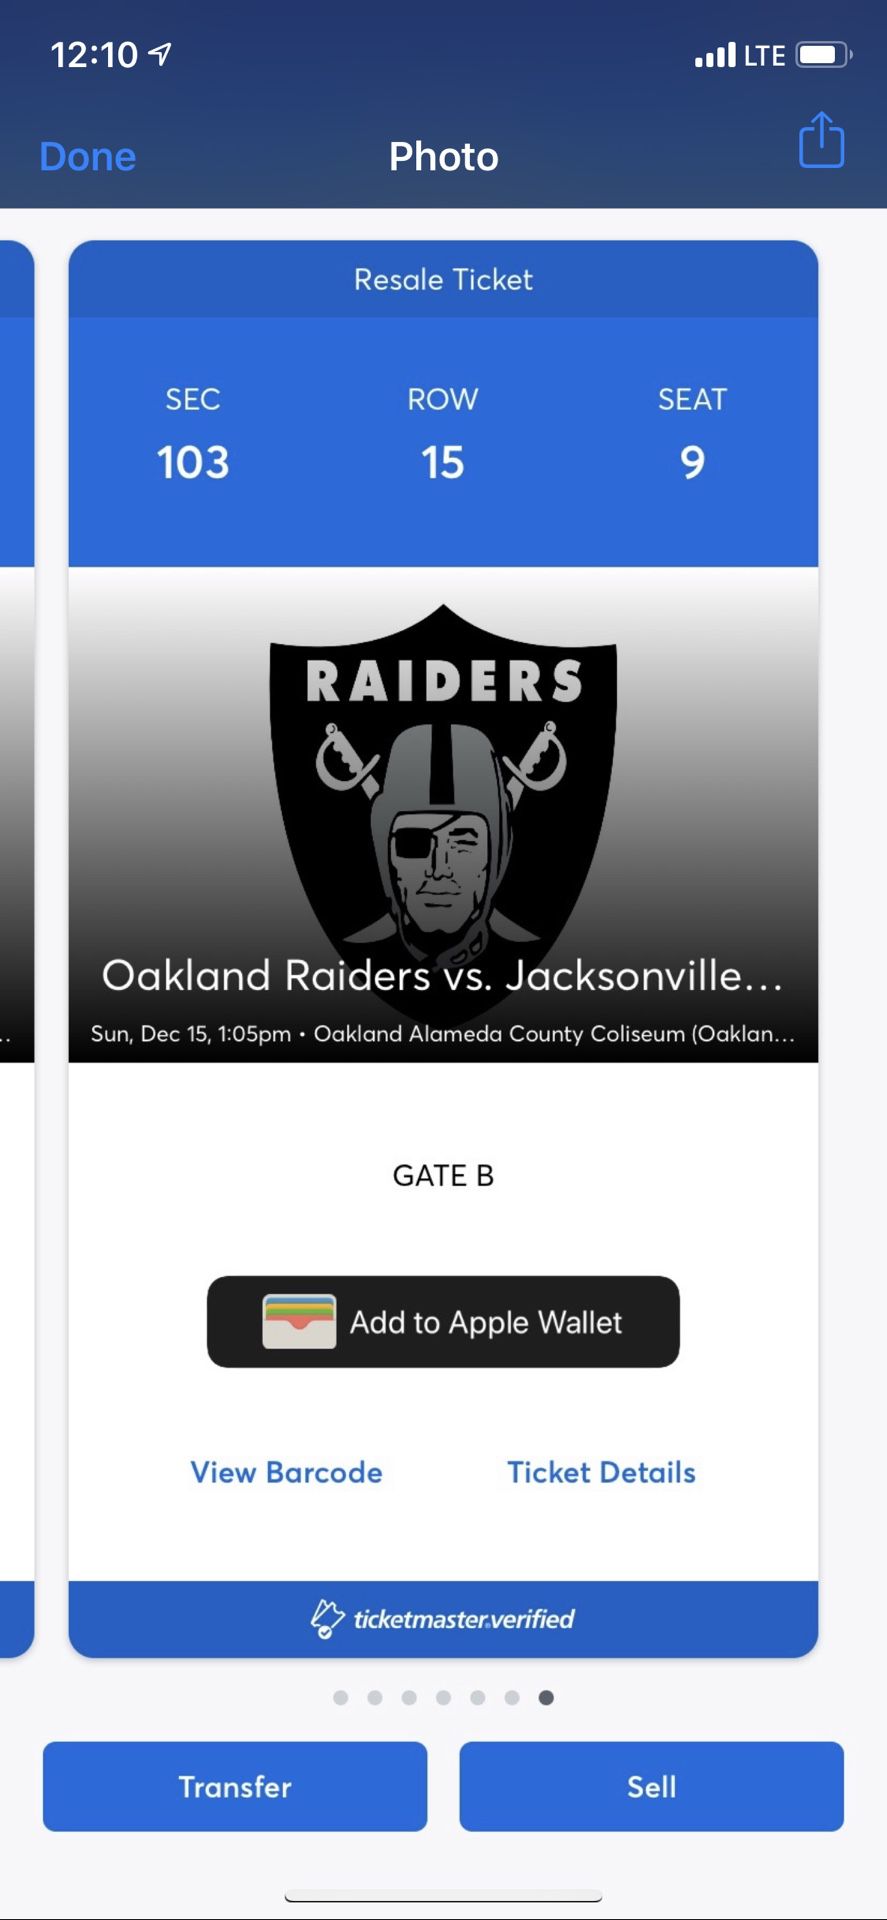 Two Black hole tickets - Last Oakland Raiders home gane ever